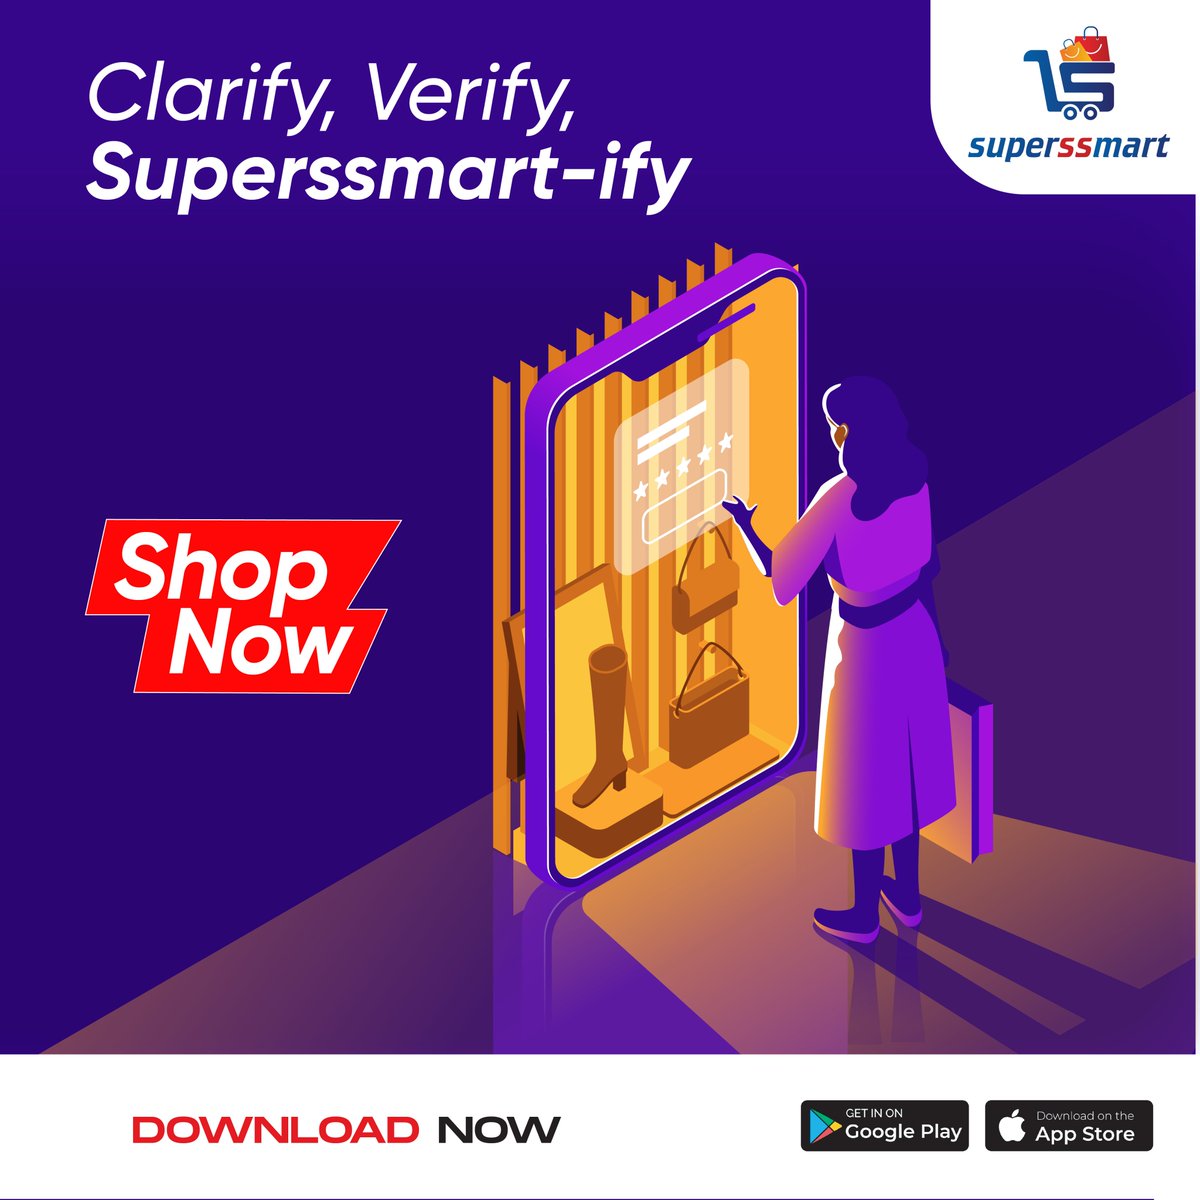 Choose, add to the cart, and shop, shop, shop! 🤩 Get the Superssmart thrill every time you purchase and shop for all of your heart's desires from the comfort of your home today! 🎊🛒

#onlineshopping #onlineshoppingindia #onlineshopindia #shoplocal #shoponline #onlineshop